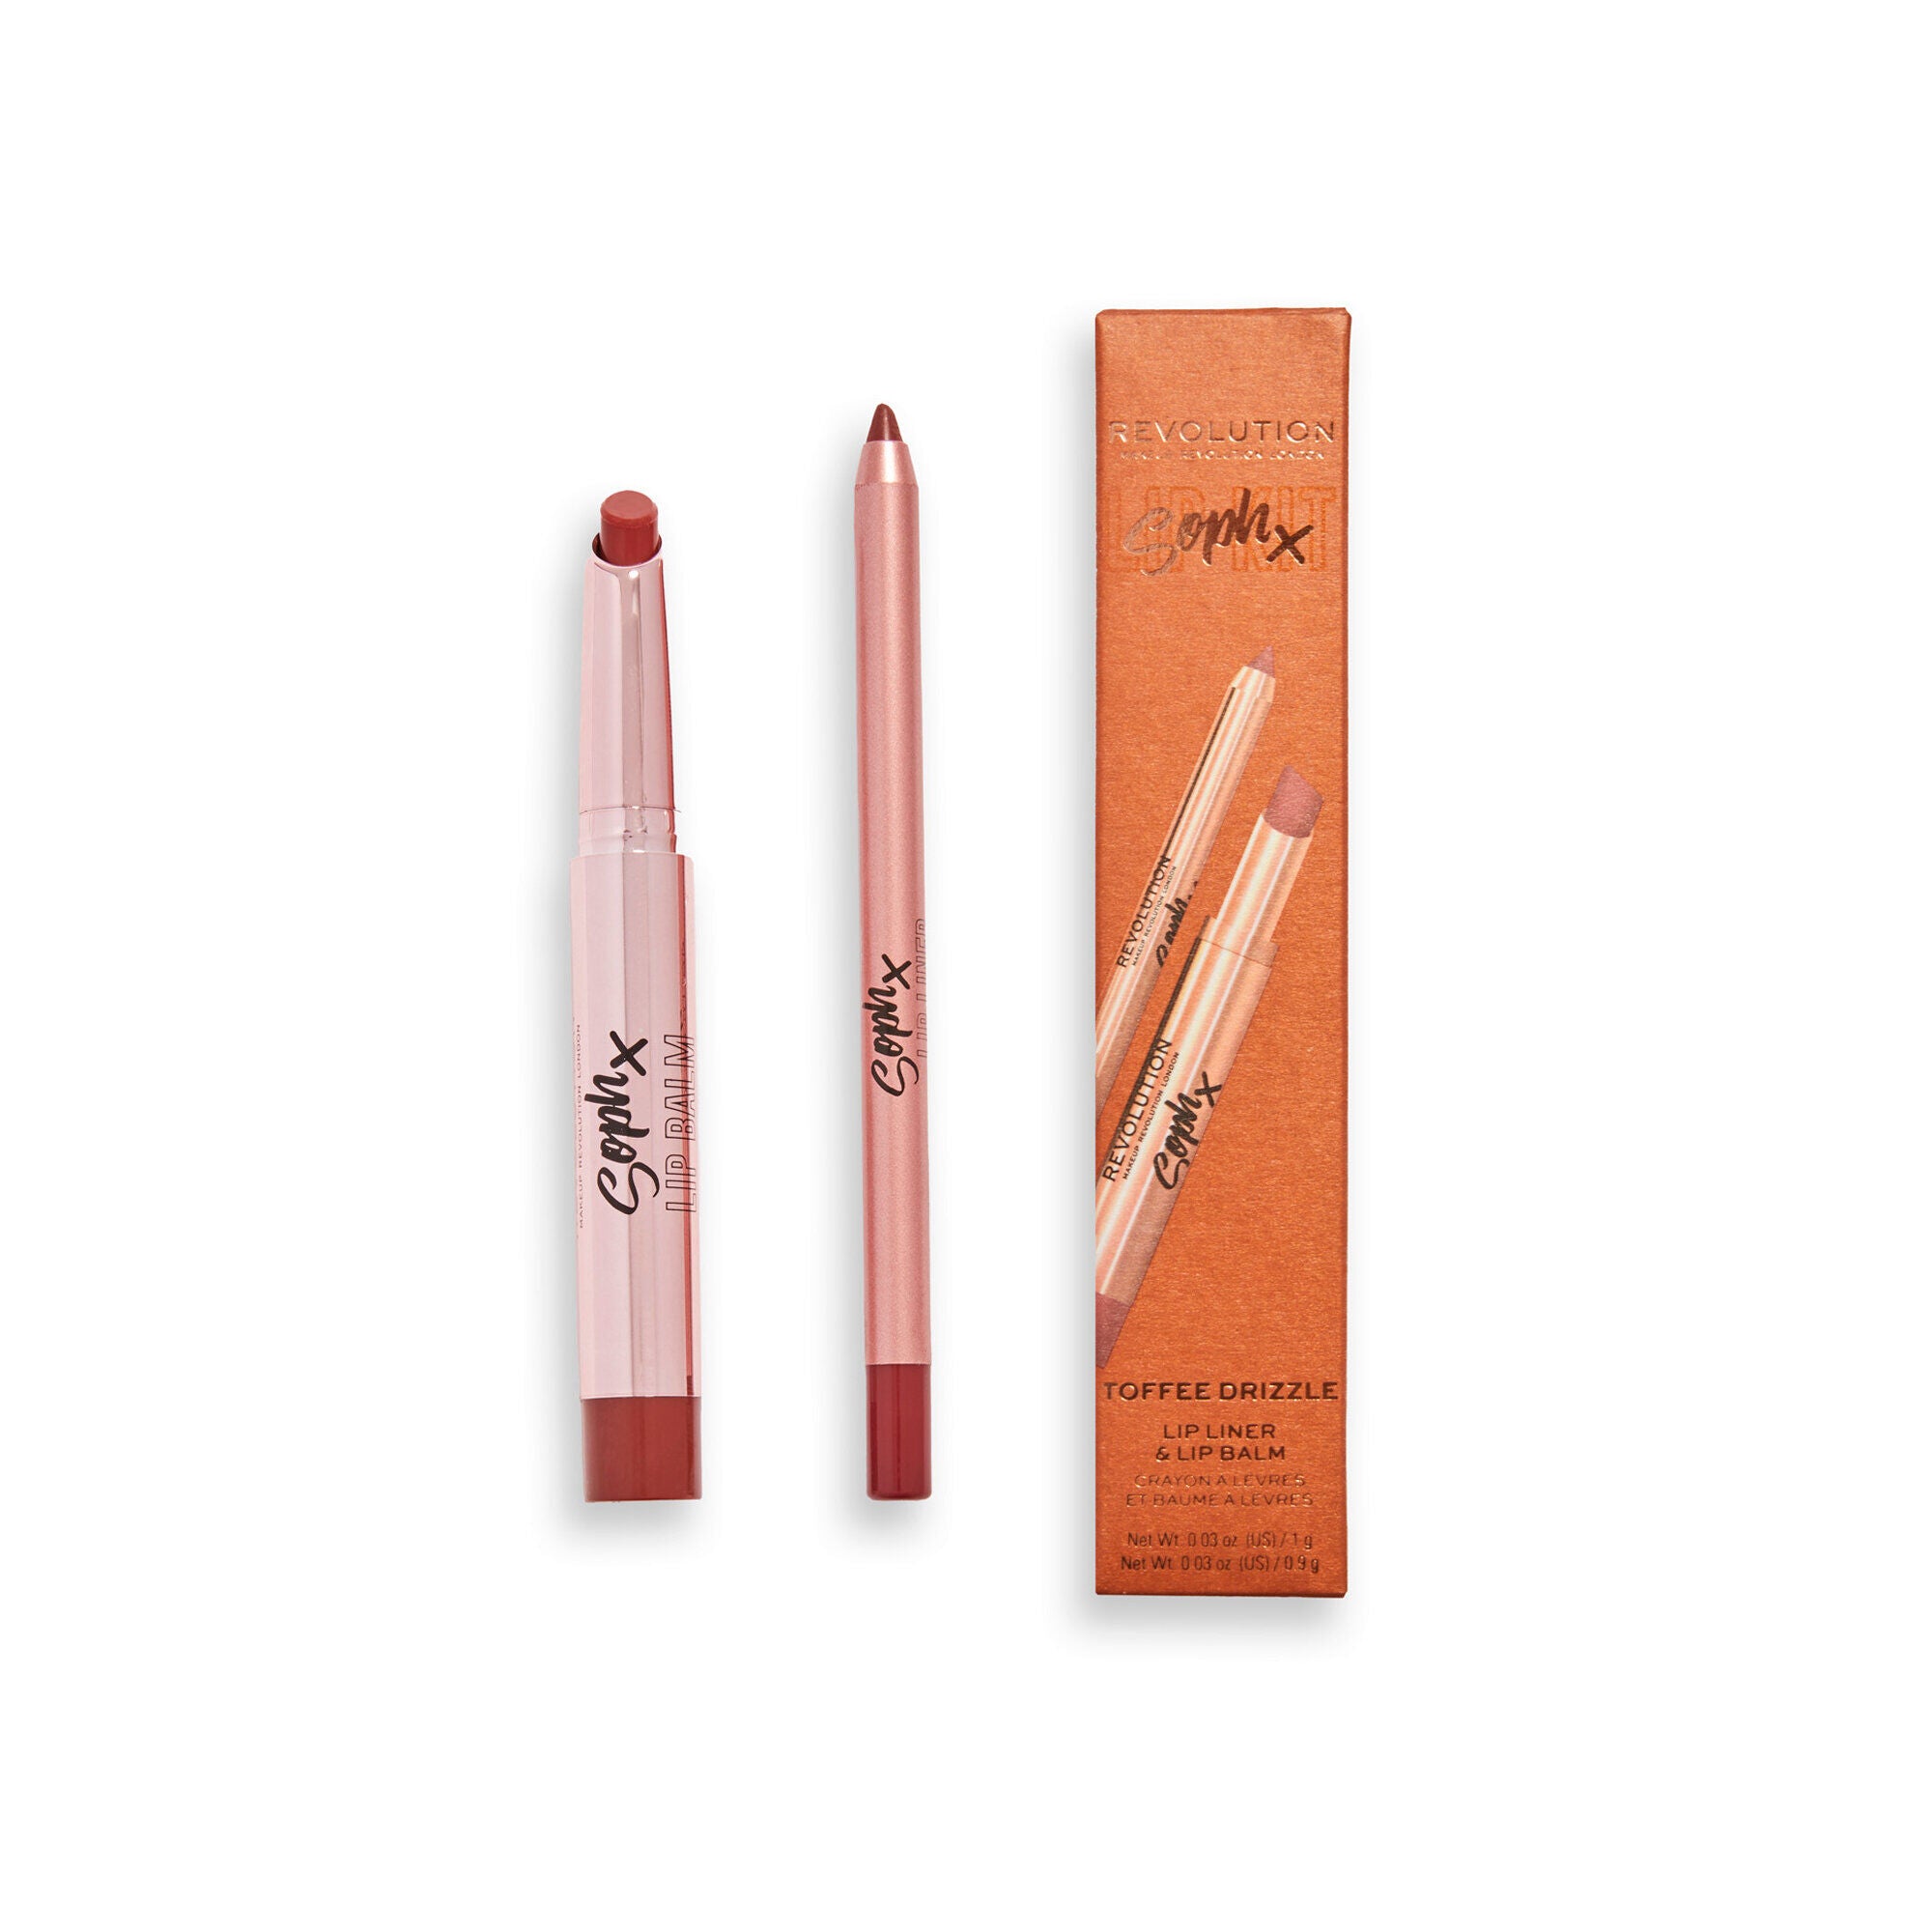 Makeup Revolution X Soph Lip Set - Toffee drizzle, with packaging